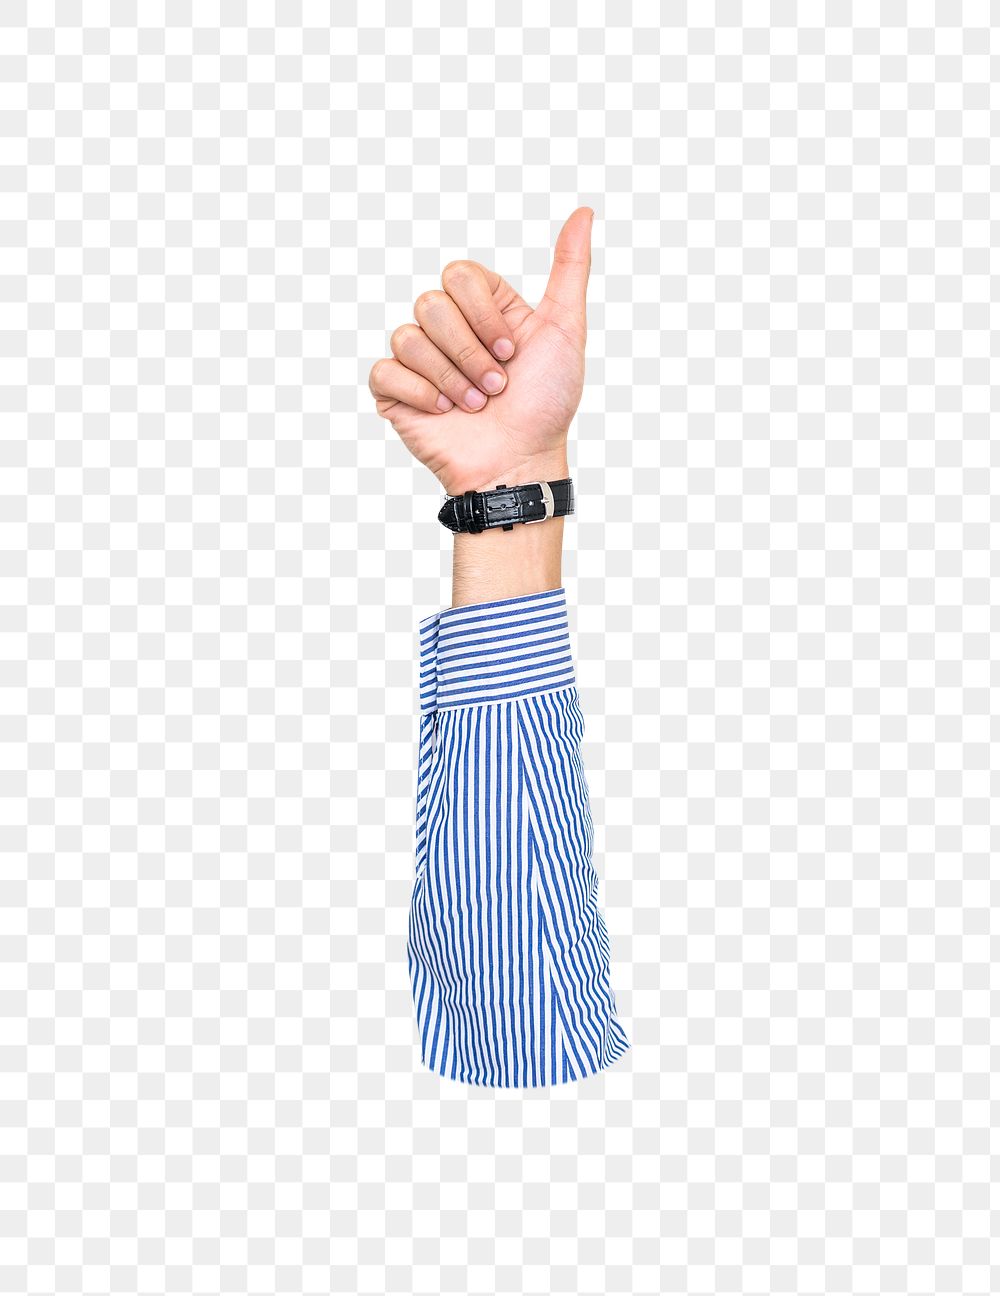 Thumbs up png hand sign, transparent background